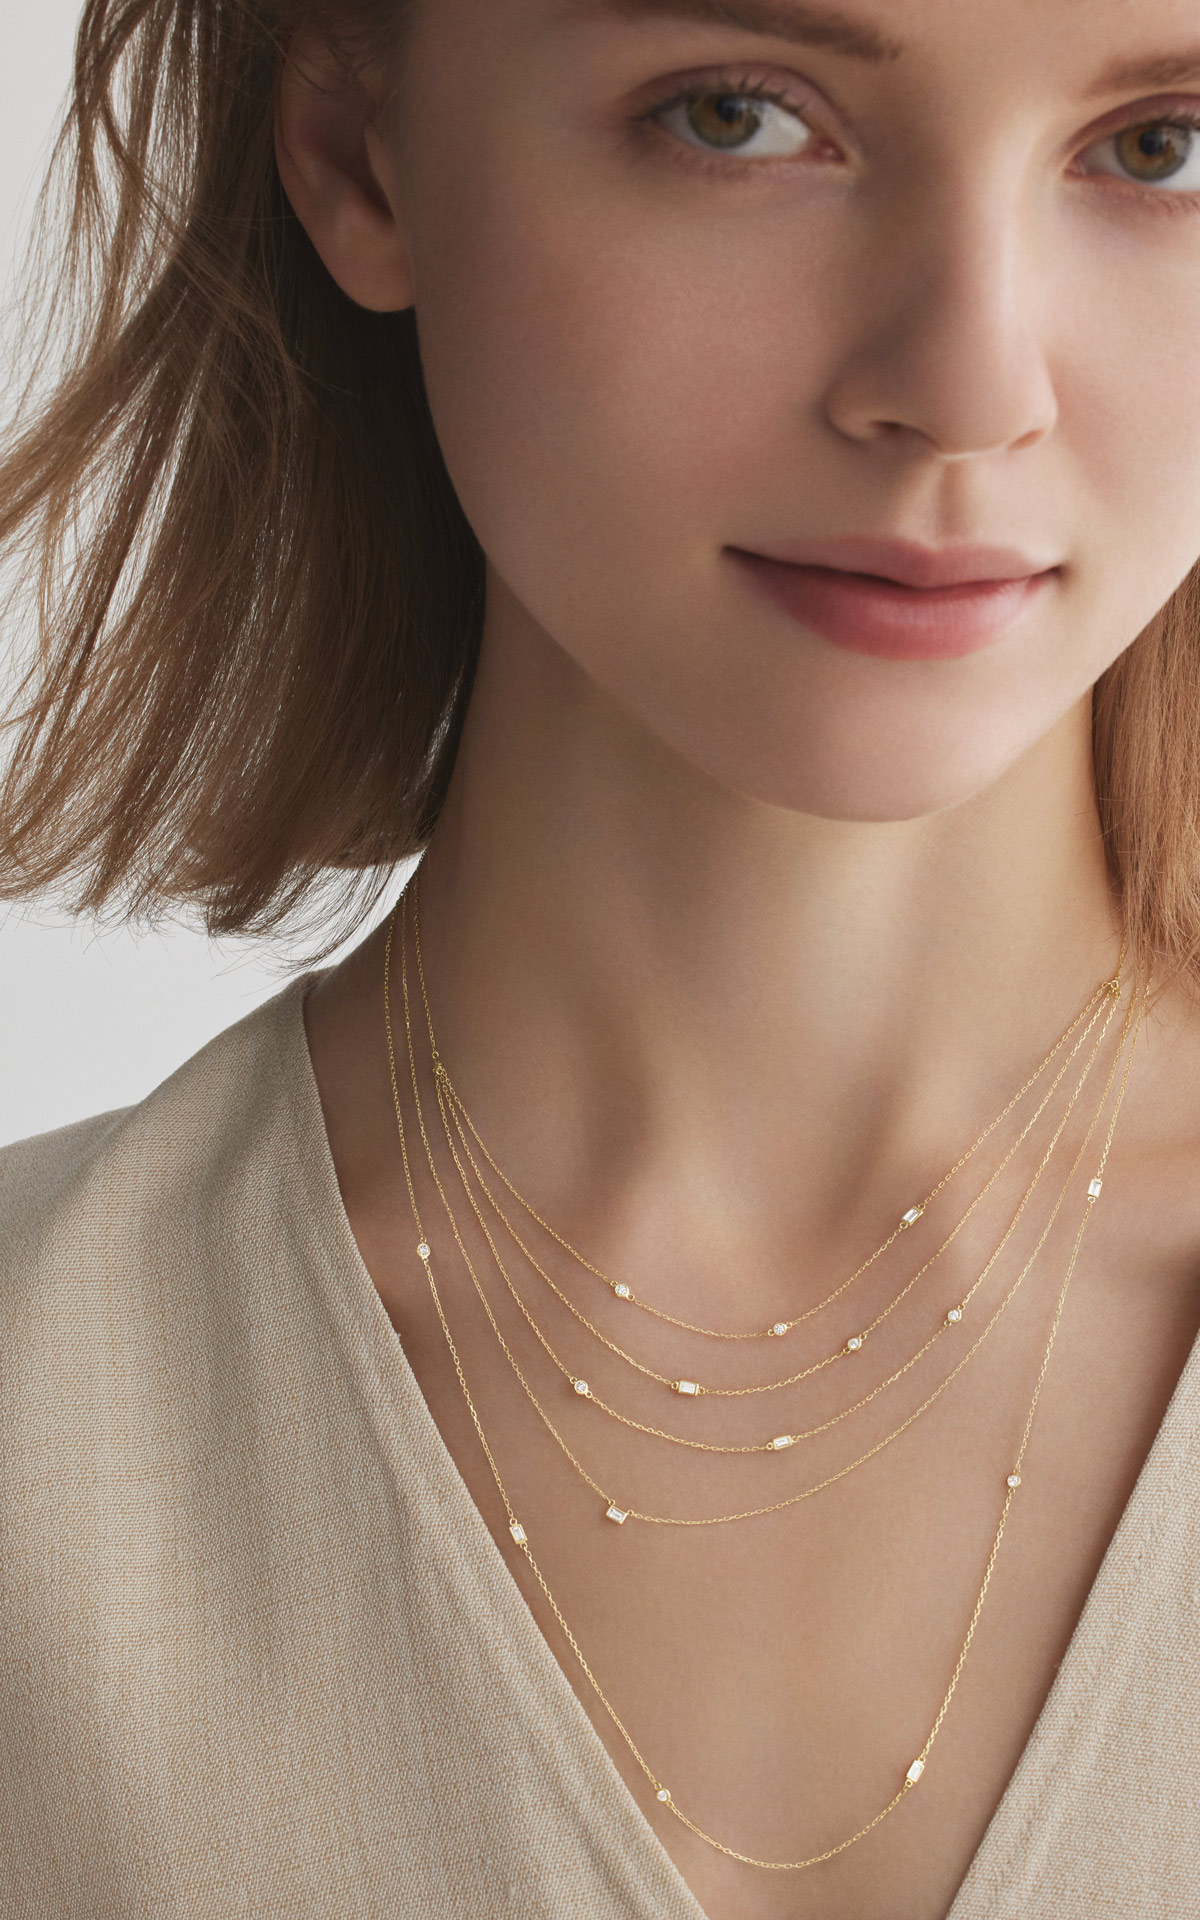 nudity grand layered necklace